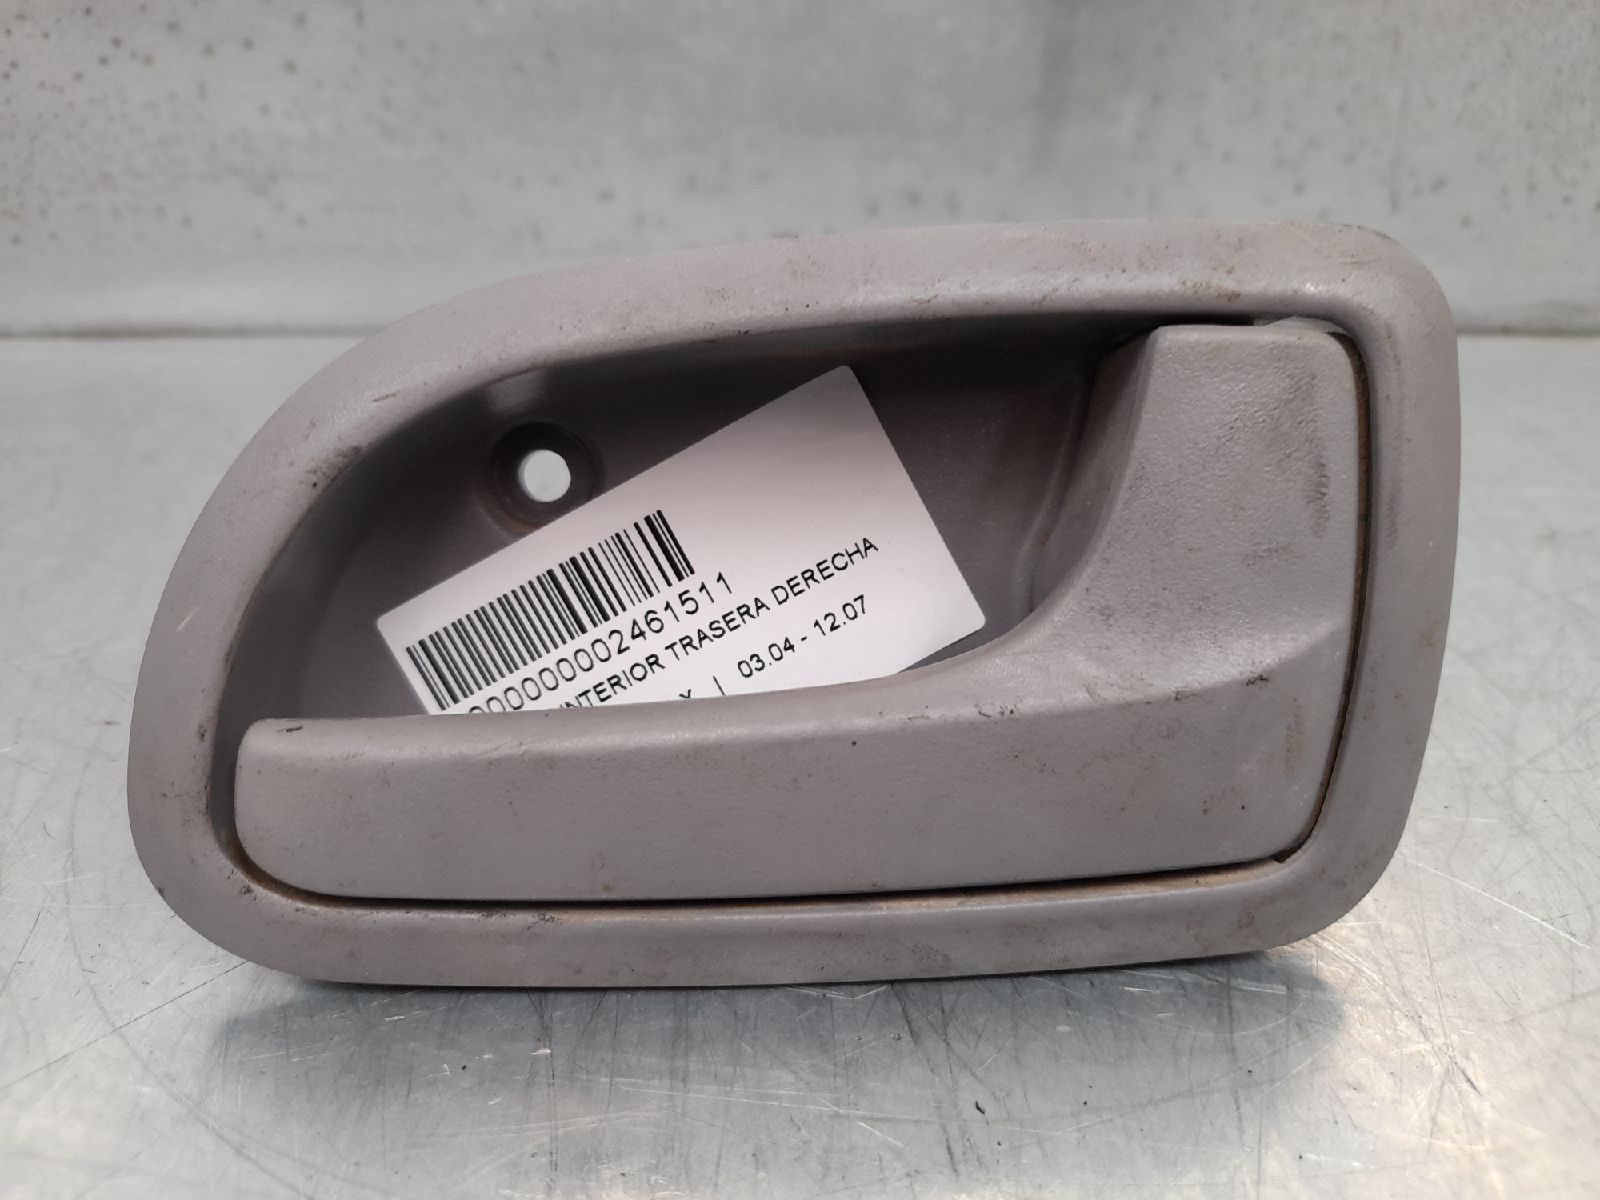 RENAULT Picanto 1 generation (2004-2011) Right Rear Internal Opening Handle 8262007000 25263685